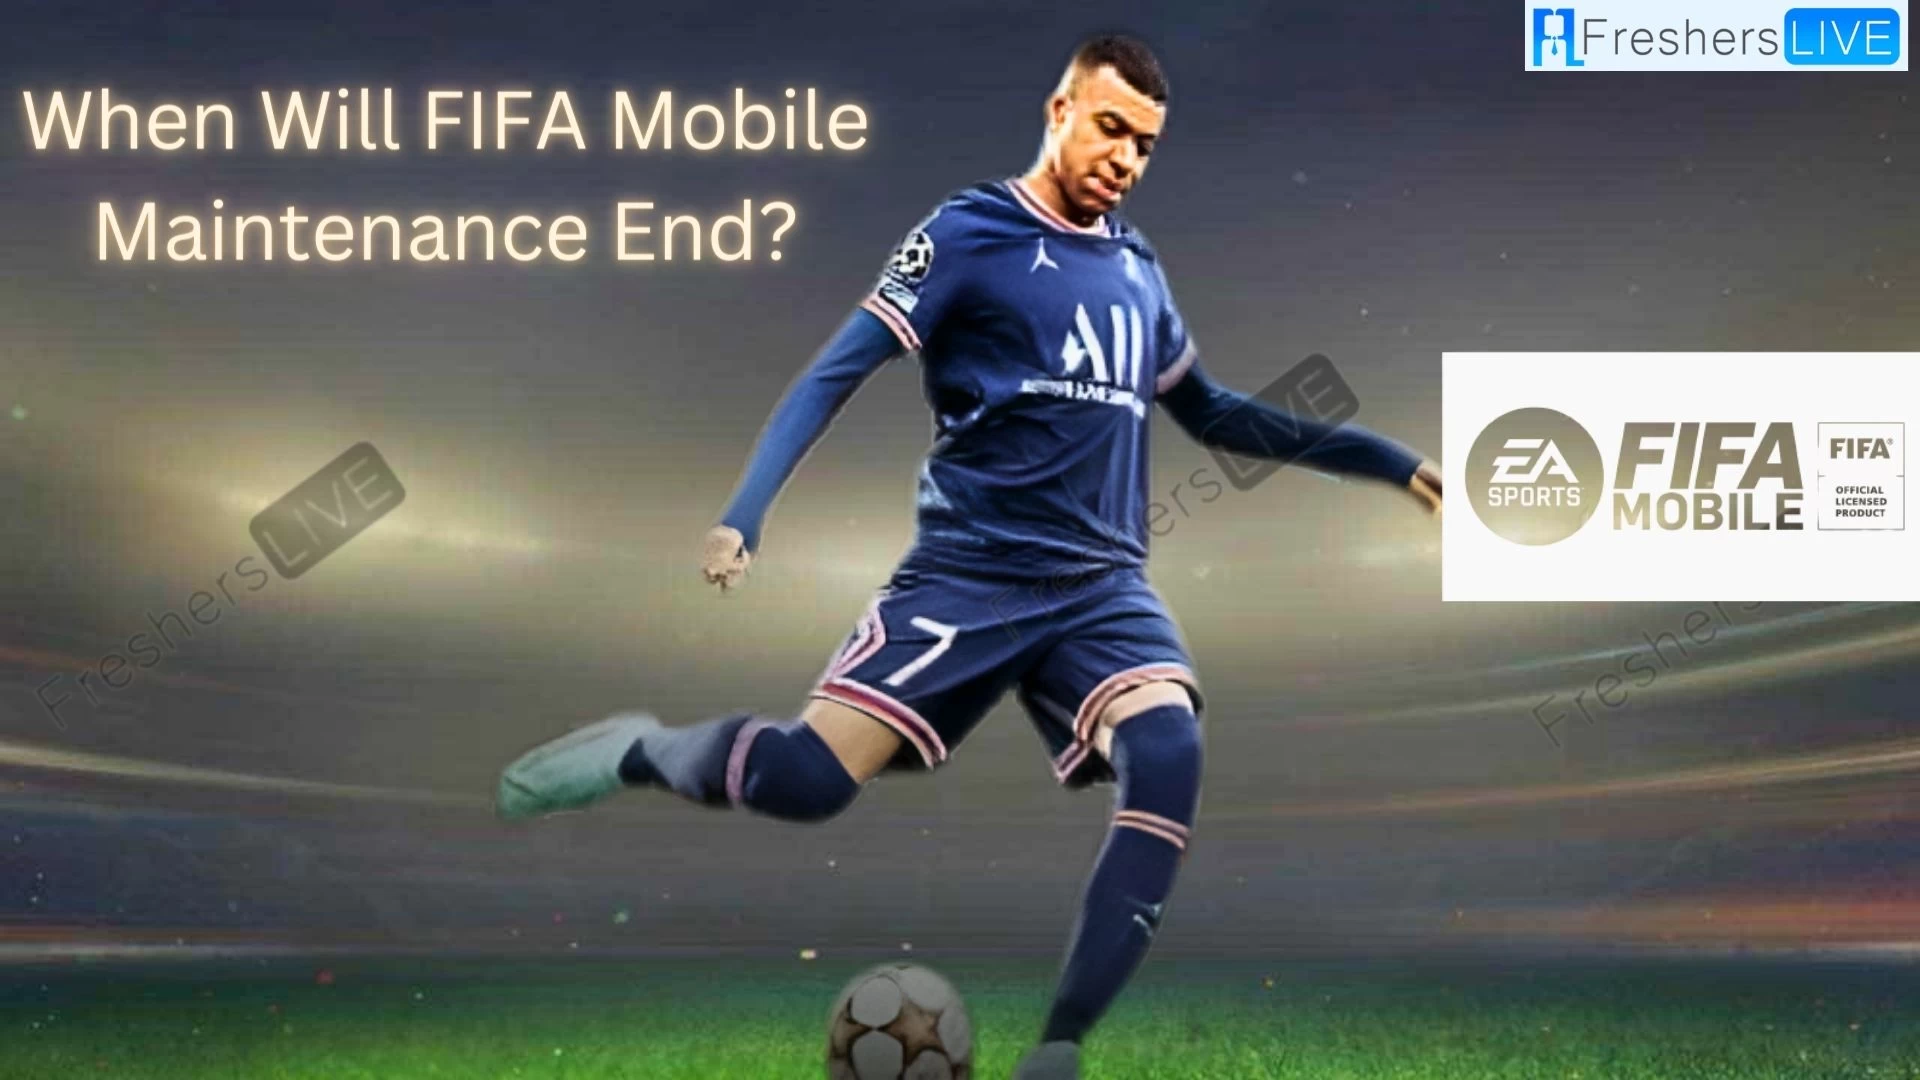 When Will FIFA Mobile Maintenance End?